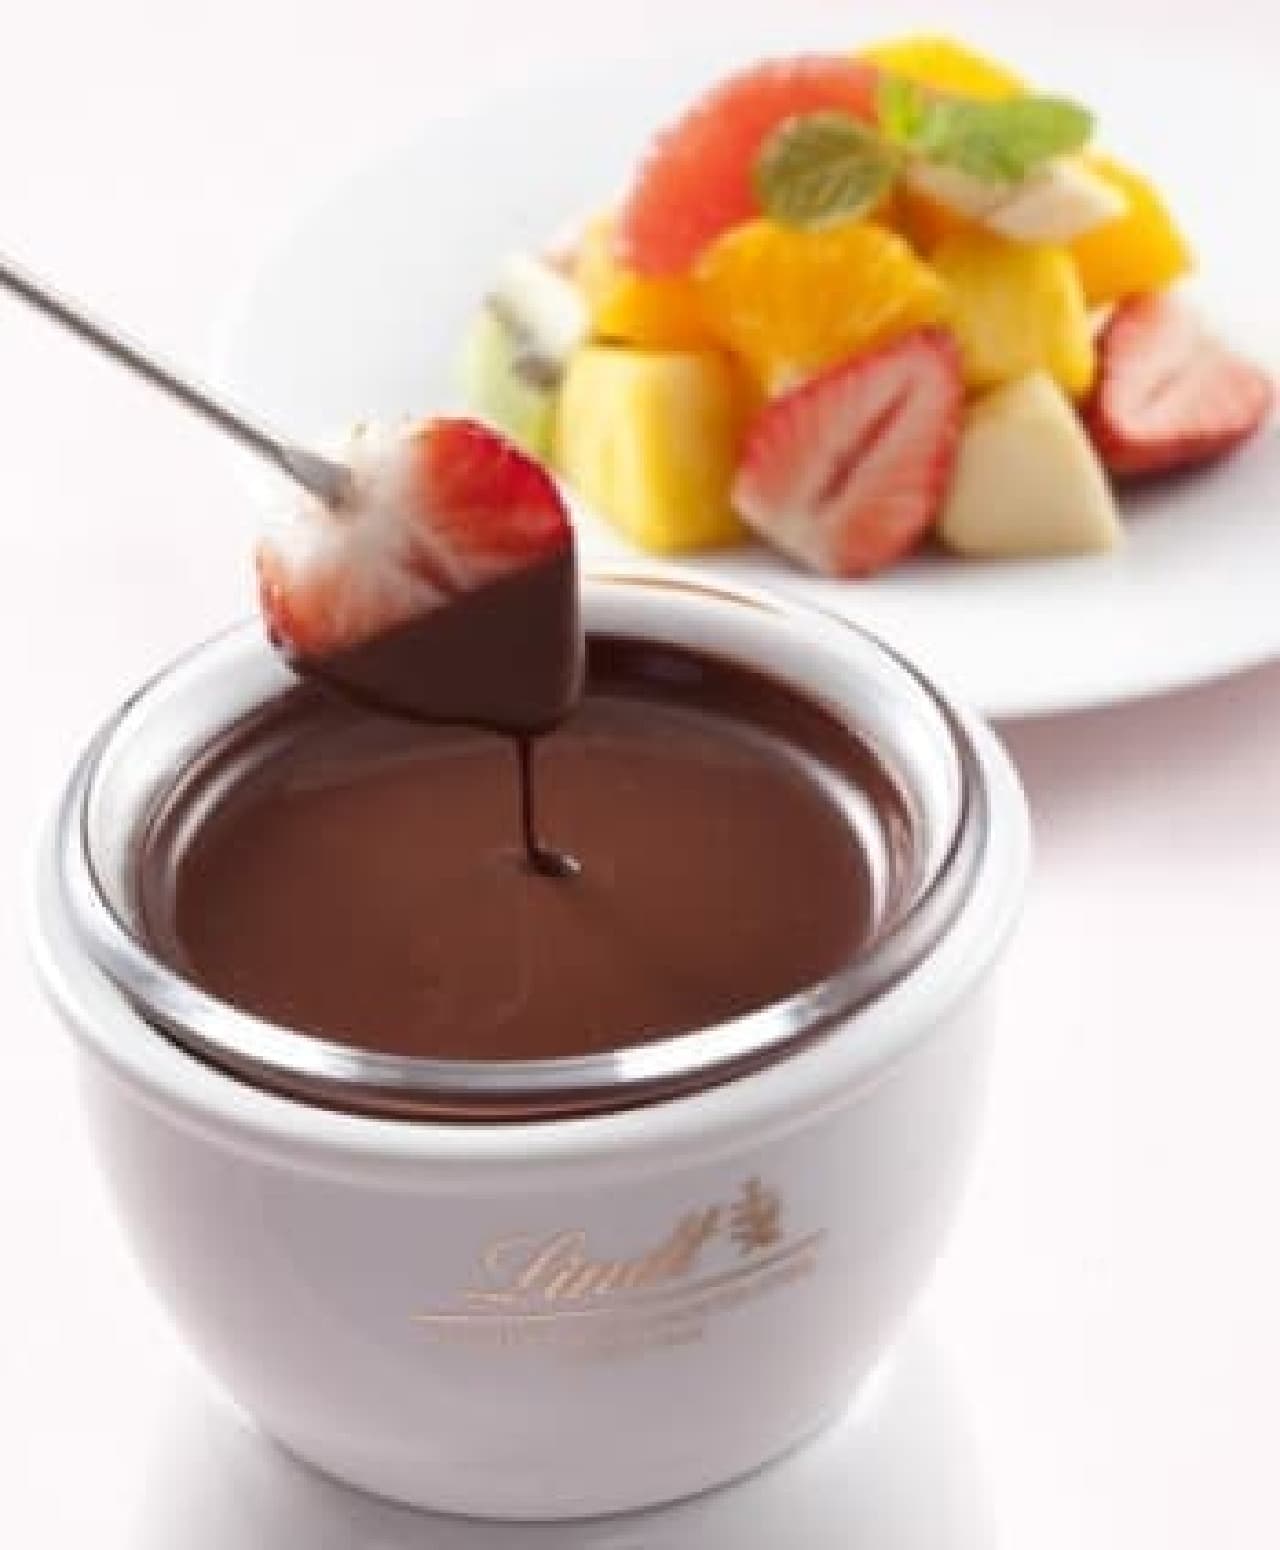 Fresh fruit with rich chocolate ...